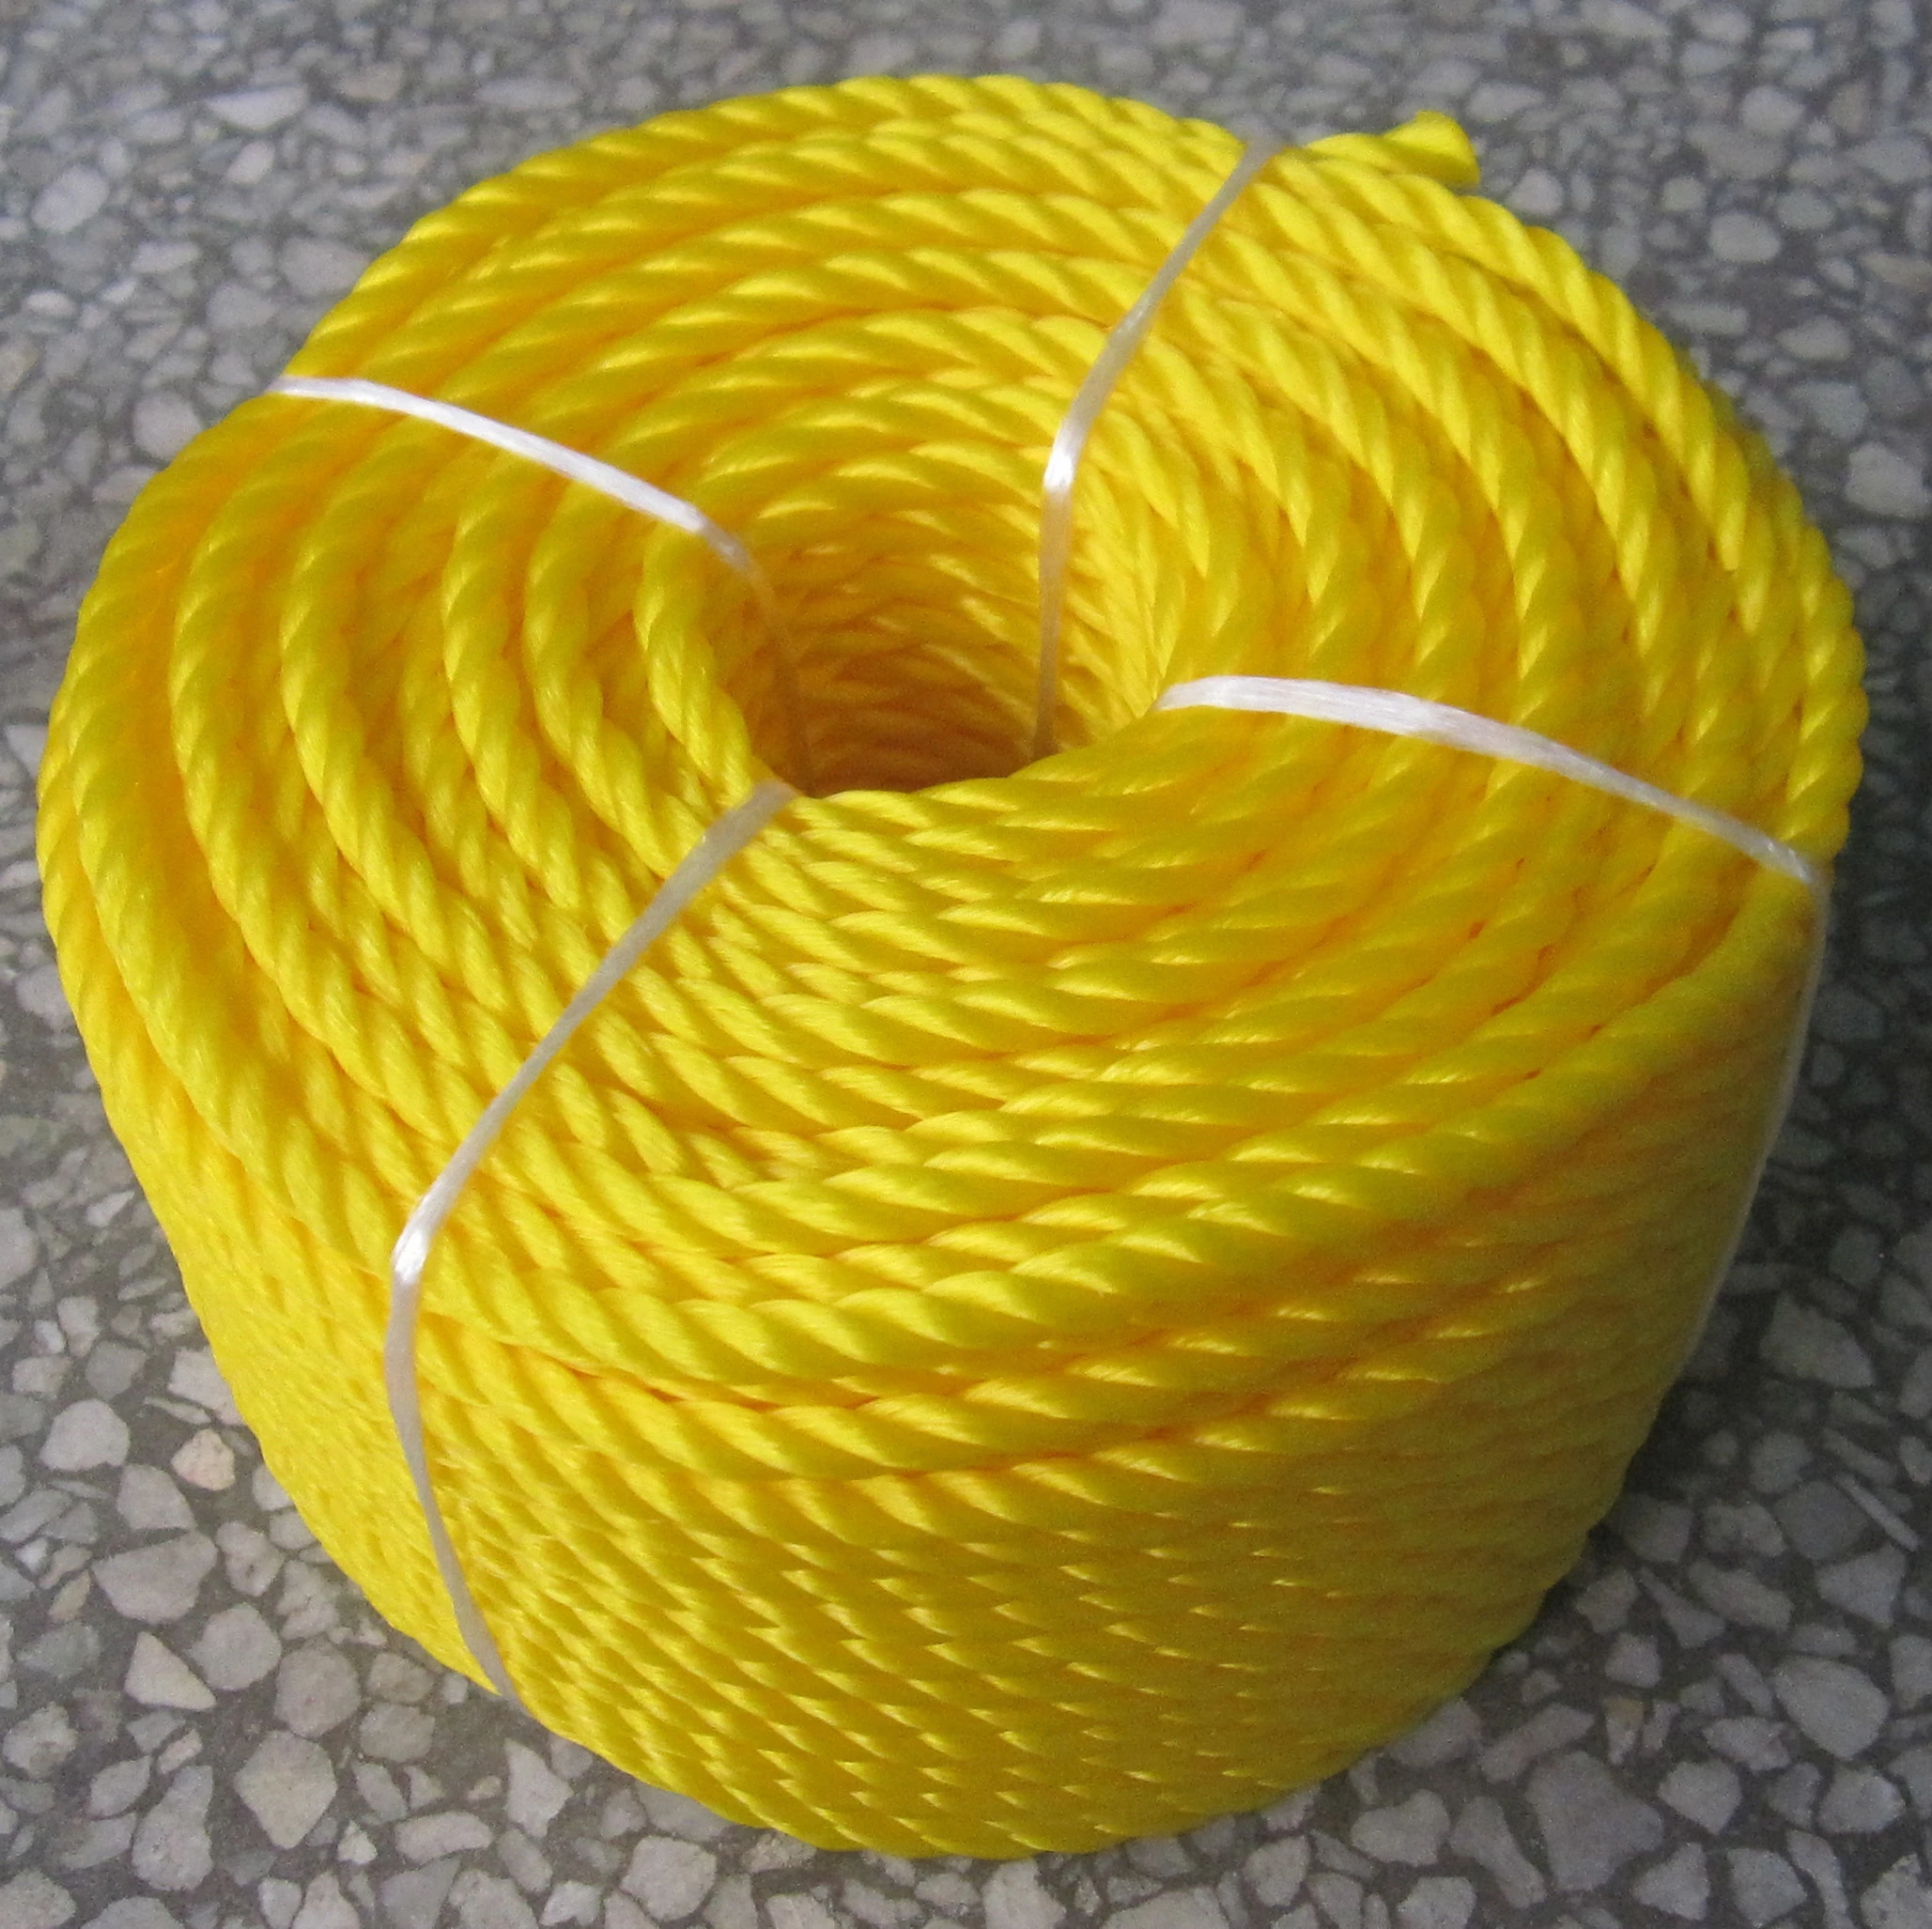 https://img2.tradewheel.com/uploads/images/products/5/5/6mm-cheap-price-100-virgin-pp-nylon-rope-3-strands-twisted-pe-boat-rope-for-africa1-0836155001618985074.jpg.webp